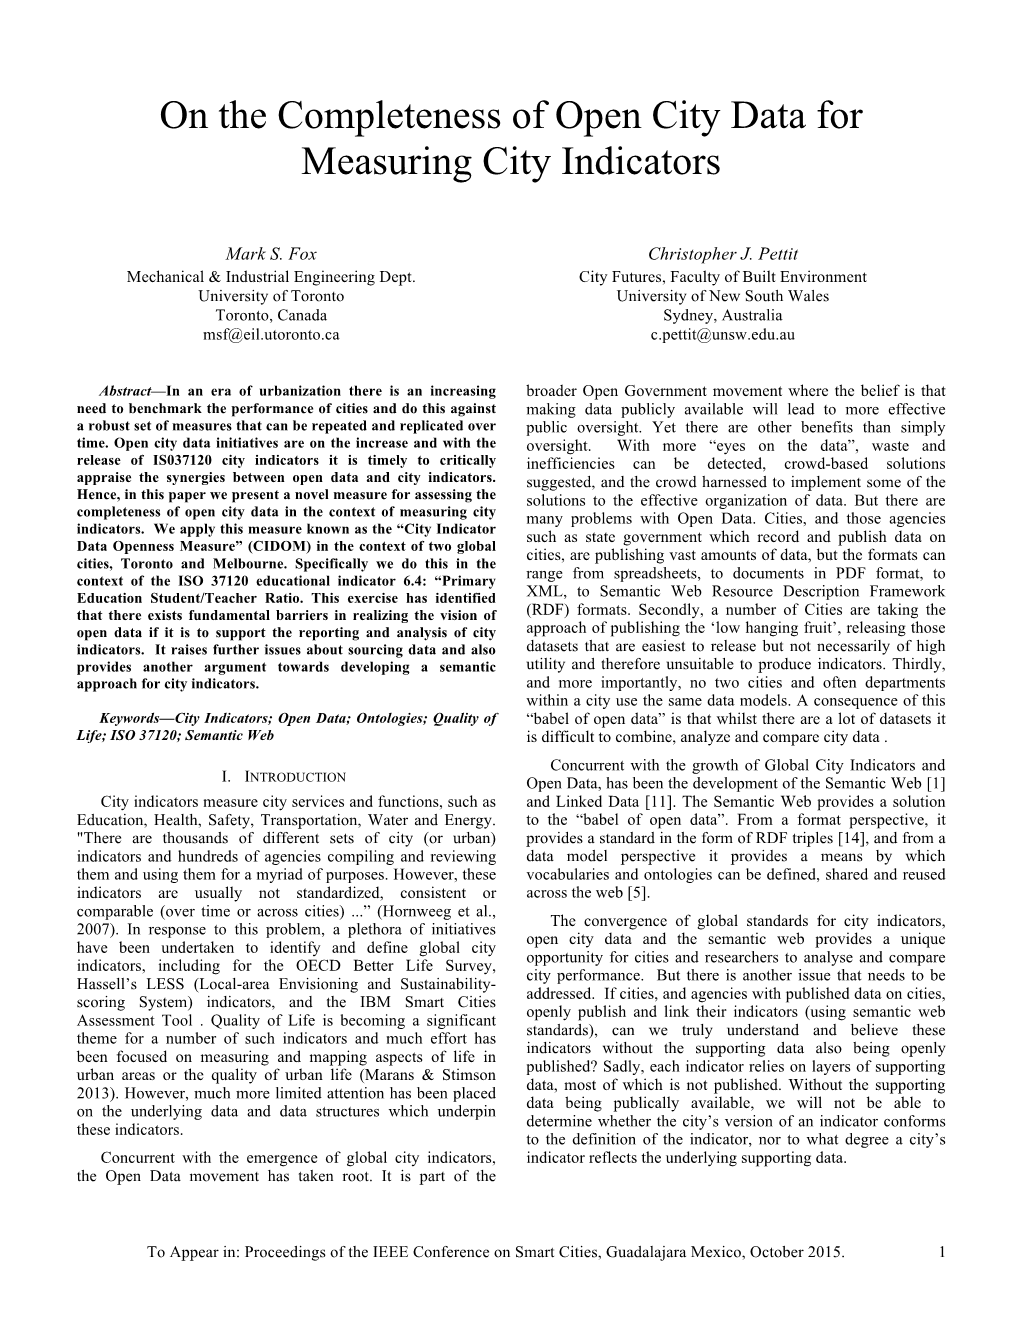 On the Completeness of Open City Data for Measuring City Indicators